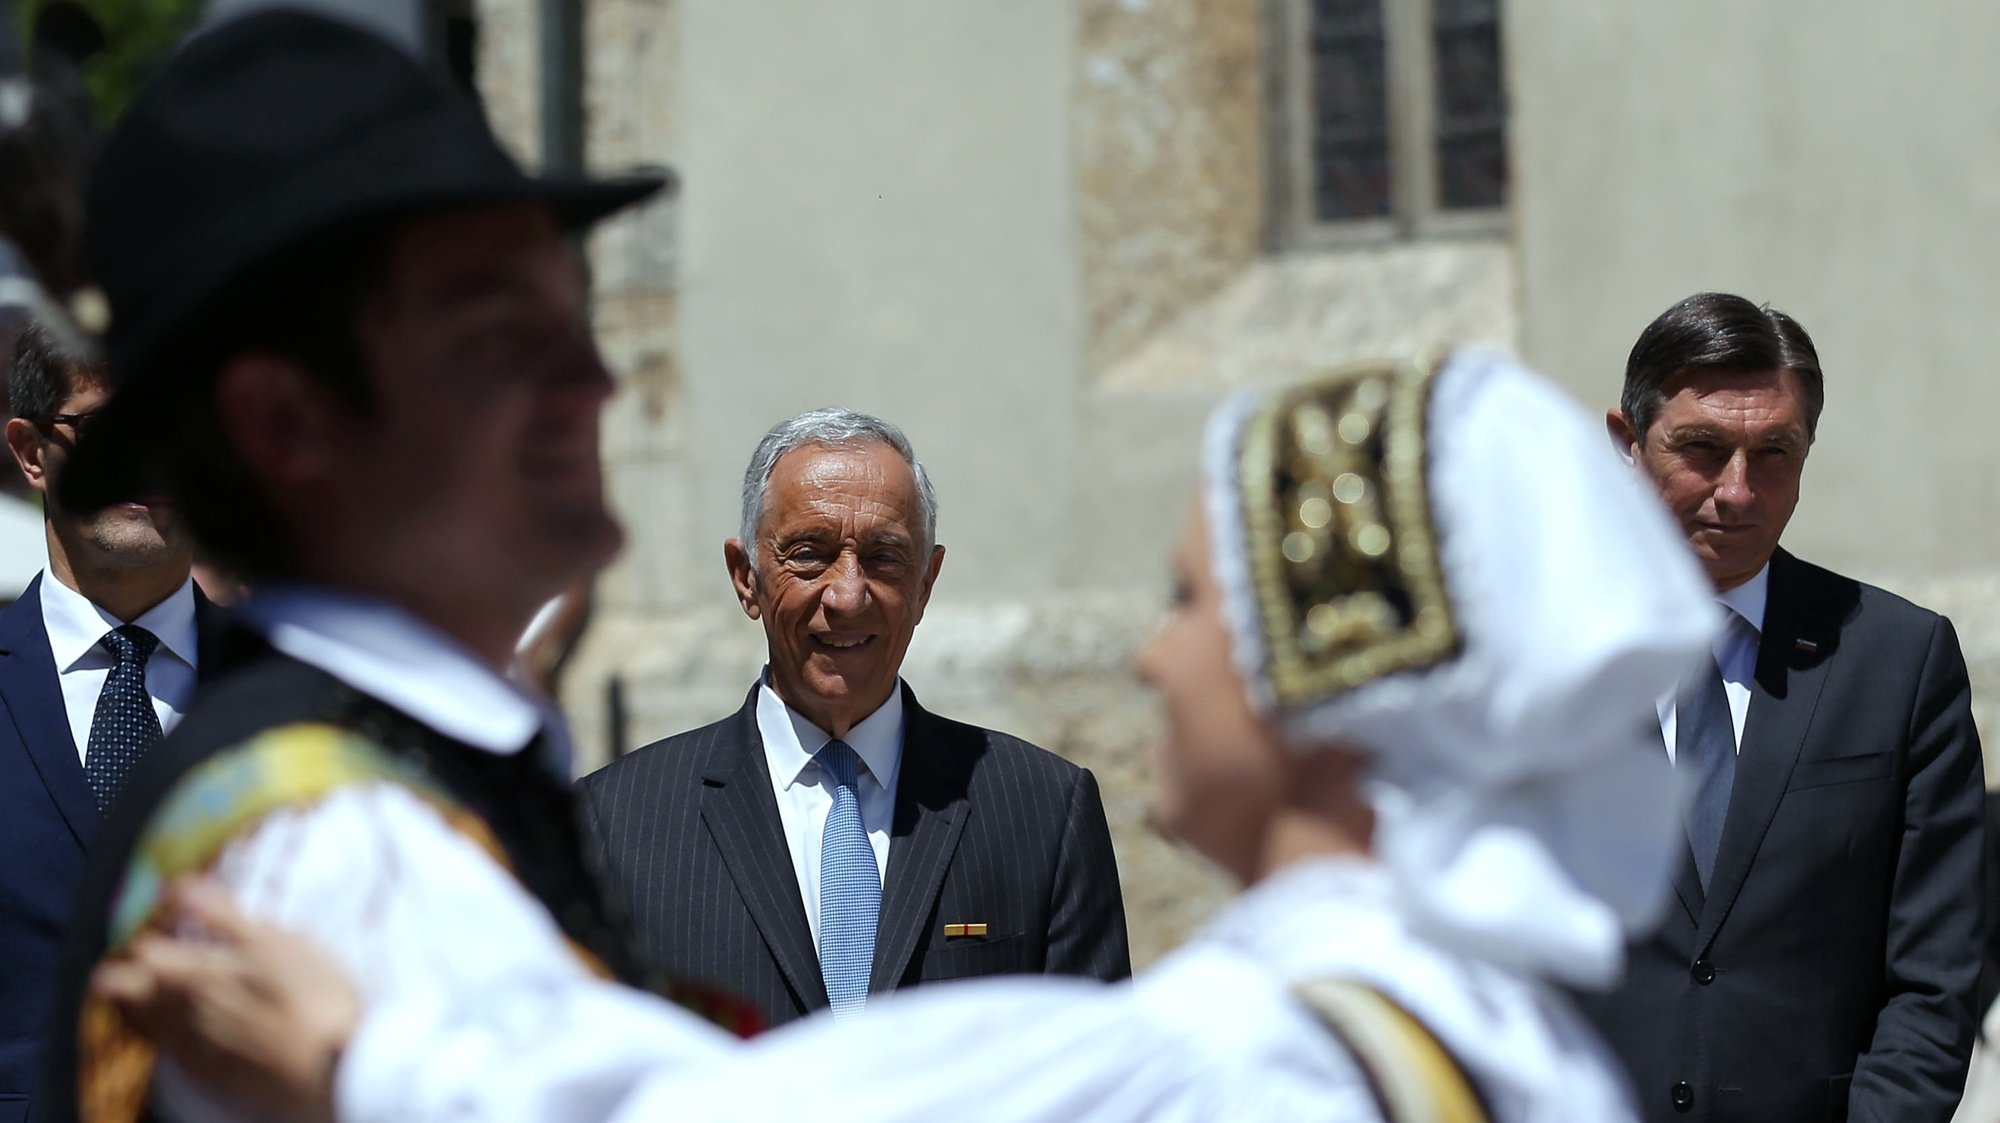 The President of Portugal, Marcelo Rebelo de Sousa (C) with the President of Slovenia, Borut Pahor (R) attend a show of slovenian traditional dances in historic city center of Kranj, in Slovenia, 01 june 2021. Marcelo Rebelo de Sousa is on an official visit to Slovenia between Sunday and Tuesday, and will then head to Bulgaria. ESTELA SILVA/LUSA